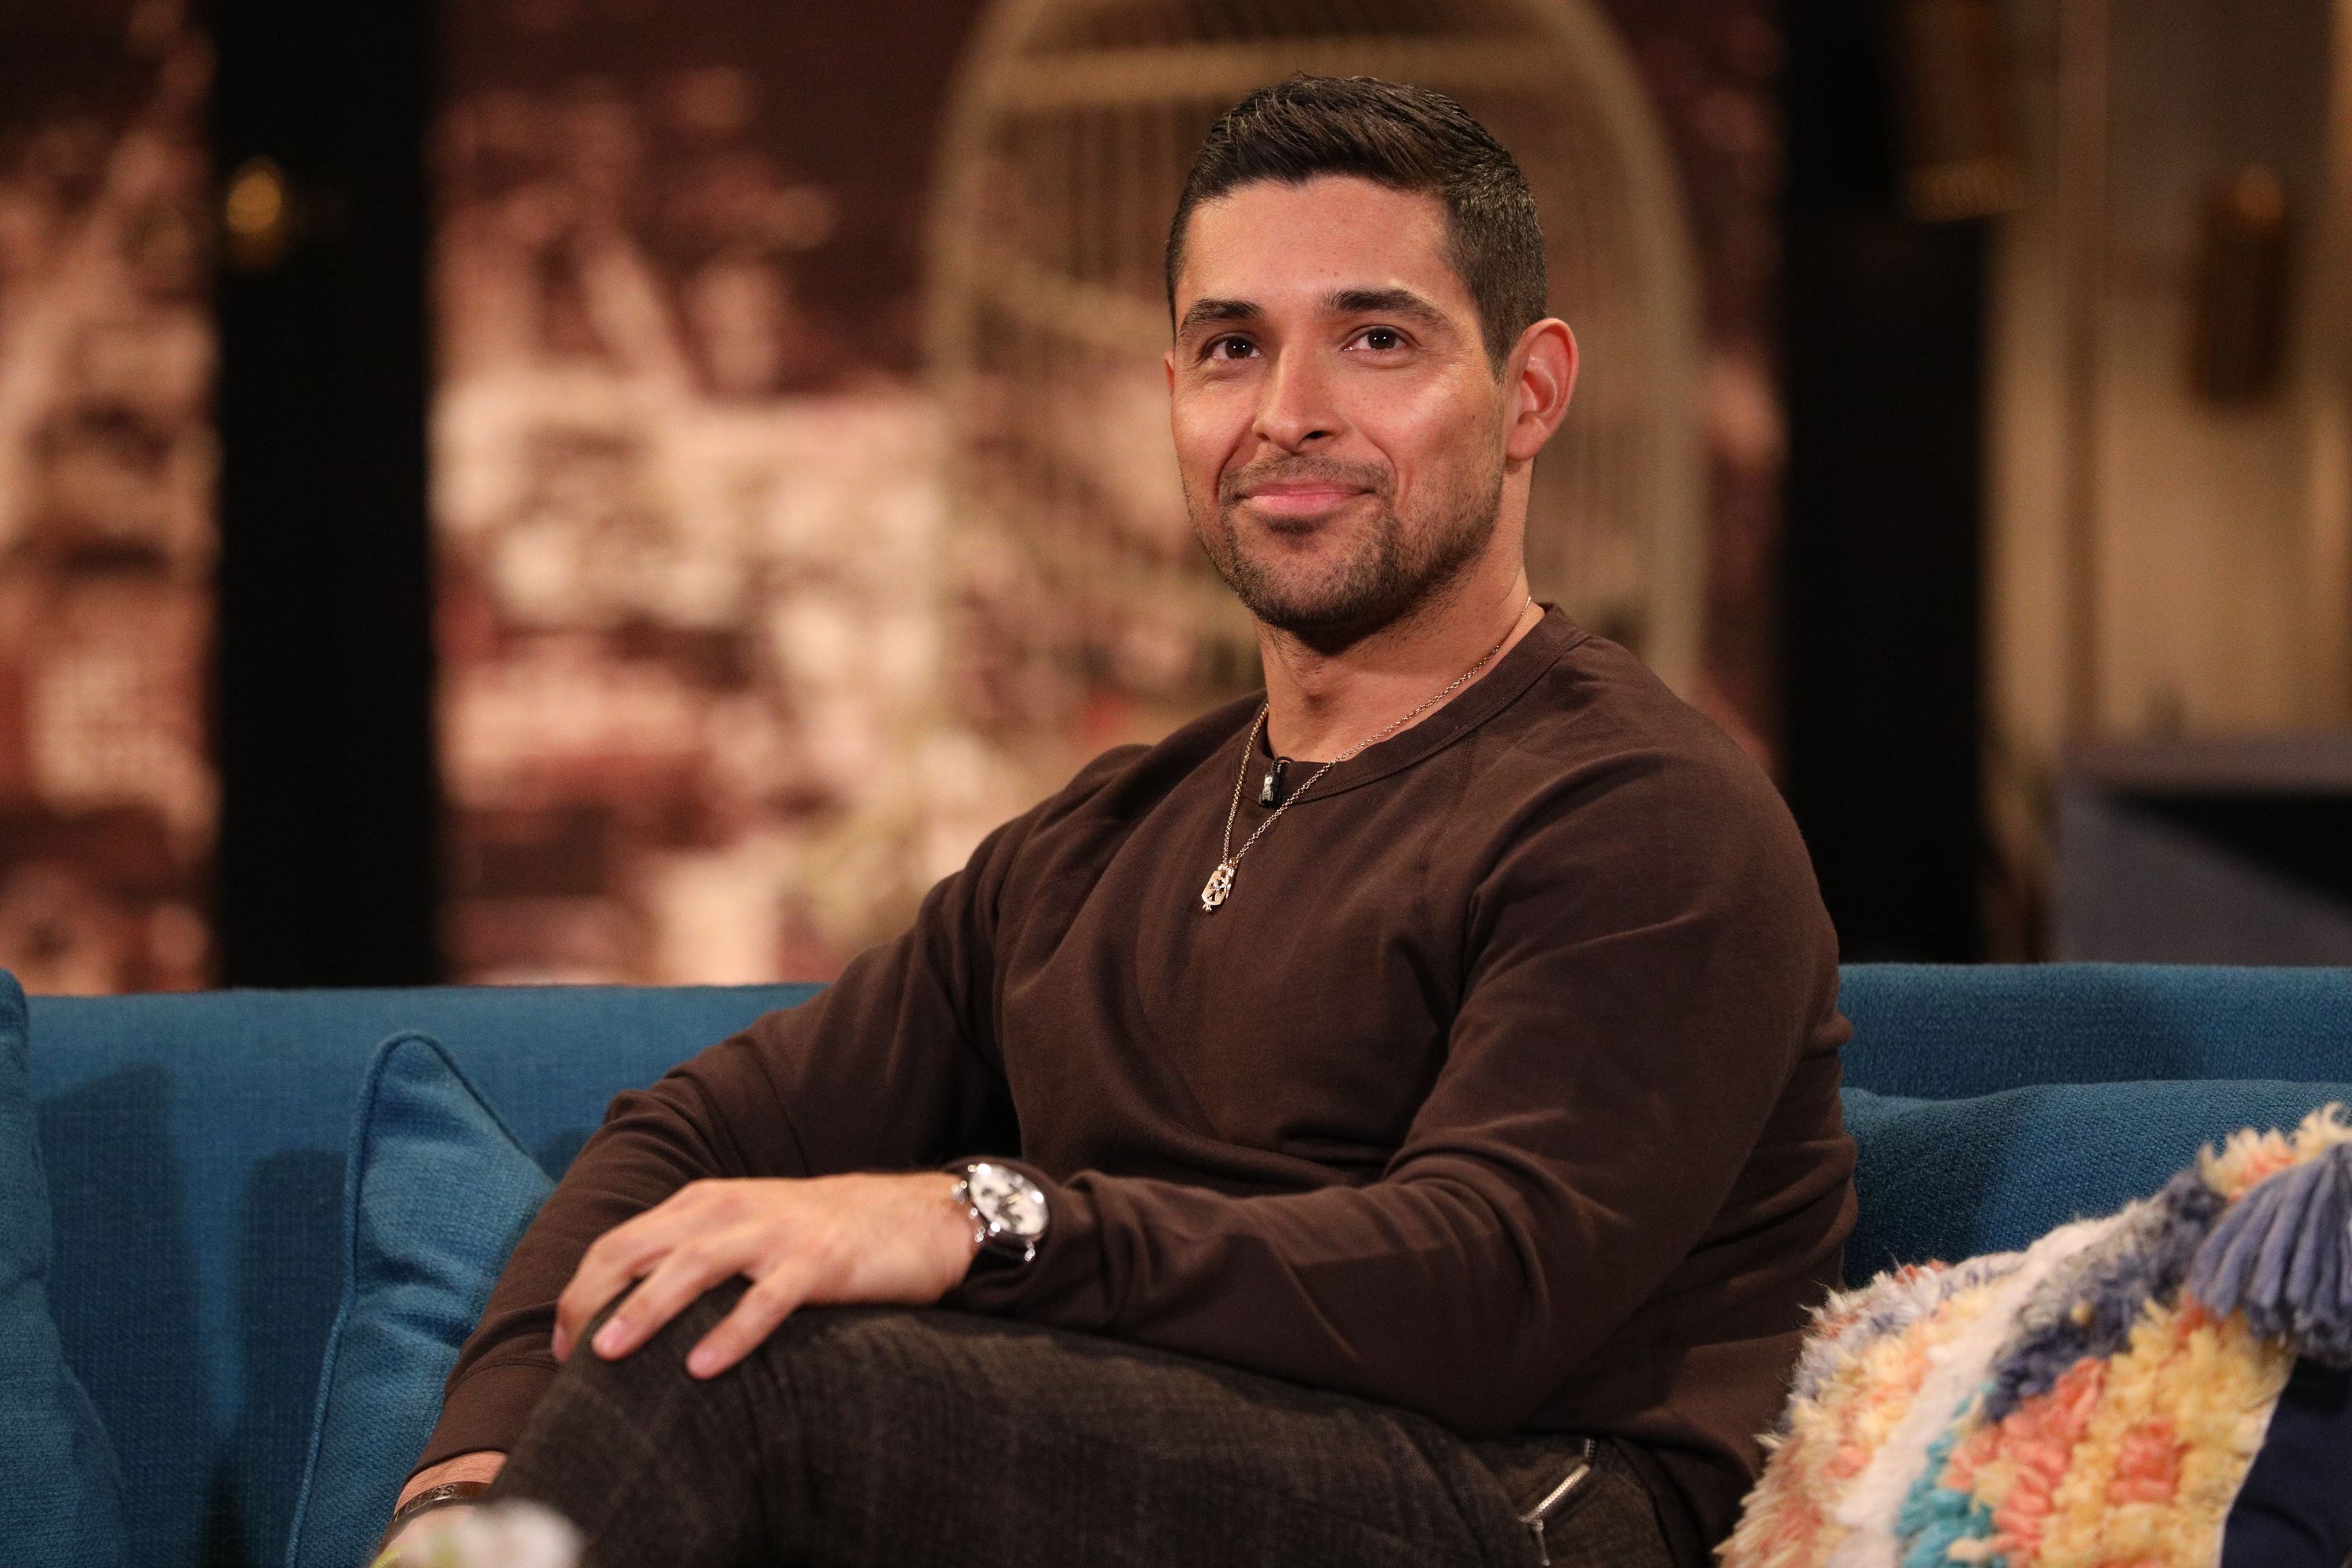 NCIS' Star Wilmer Valderrama Gets Strong Reactions From News He Could  “Finally Announce”